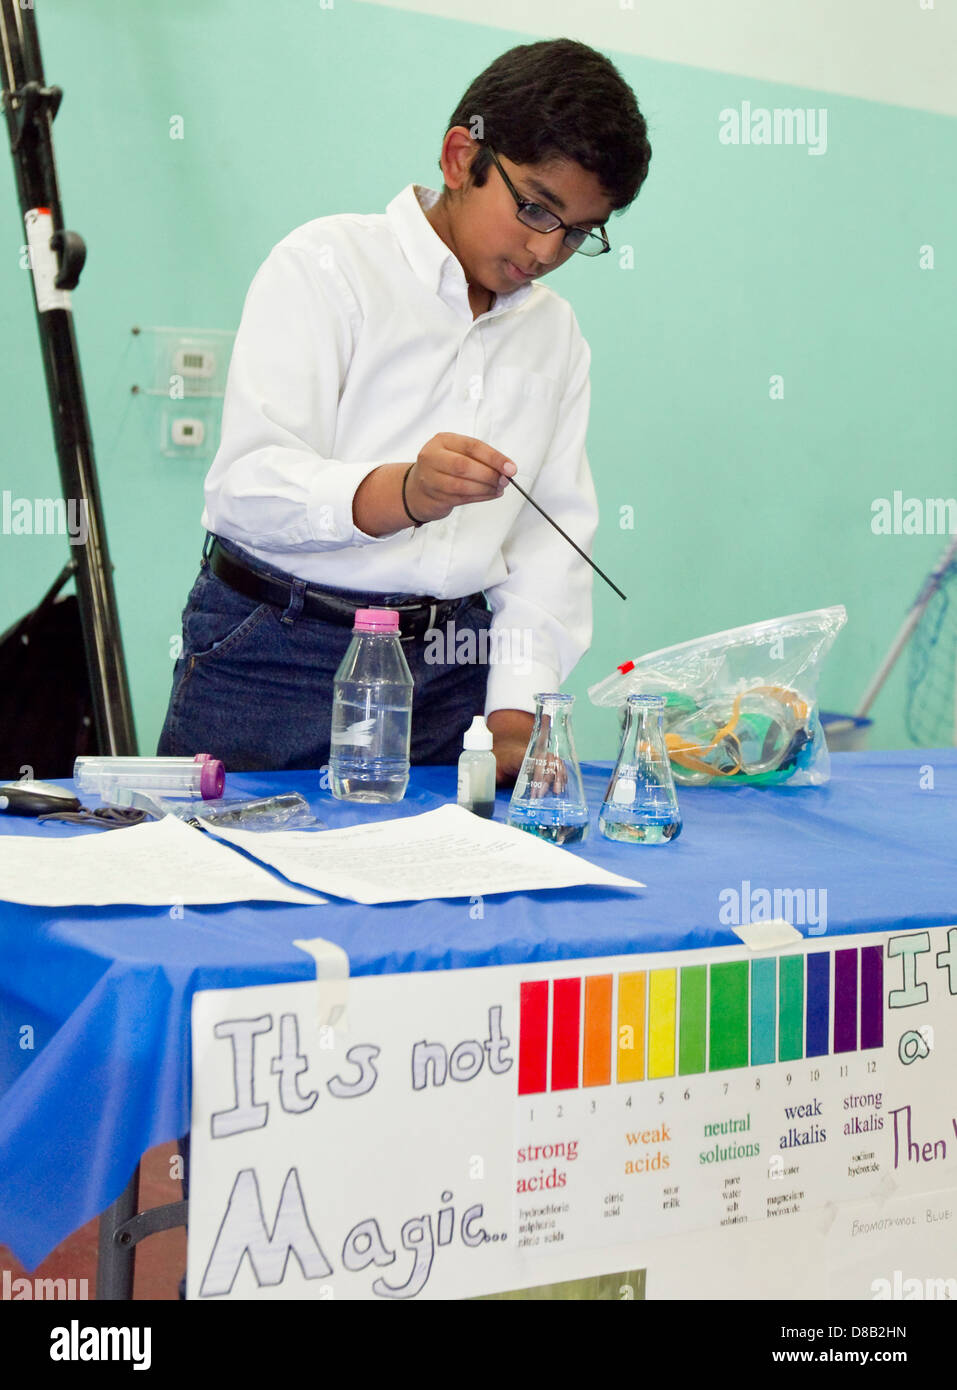 Male high school student of middle eastern decent, uses beaker  during science fair demonstration Stock Photo